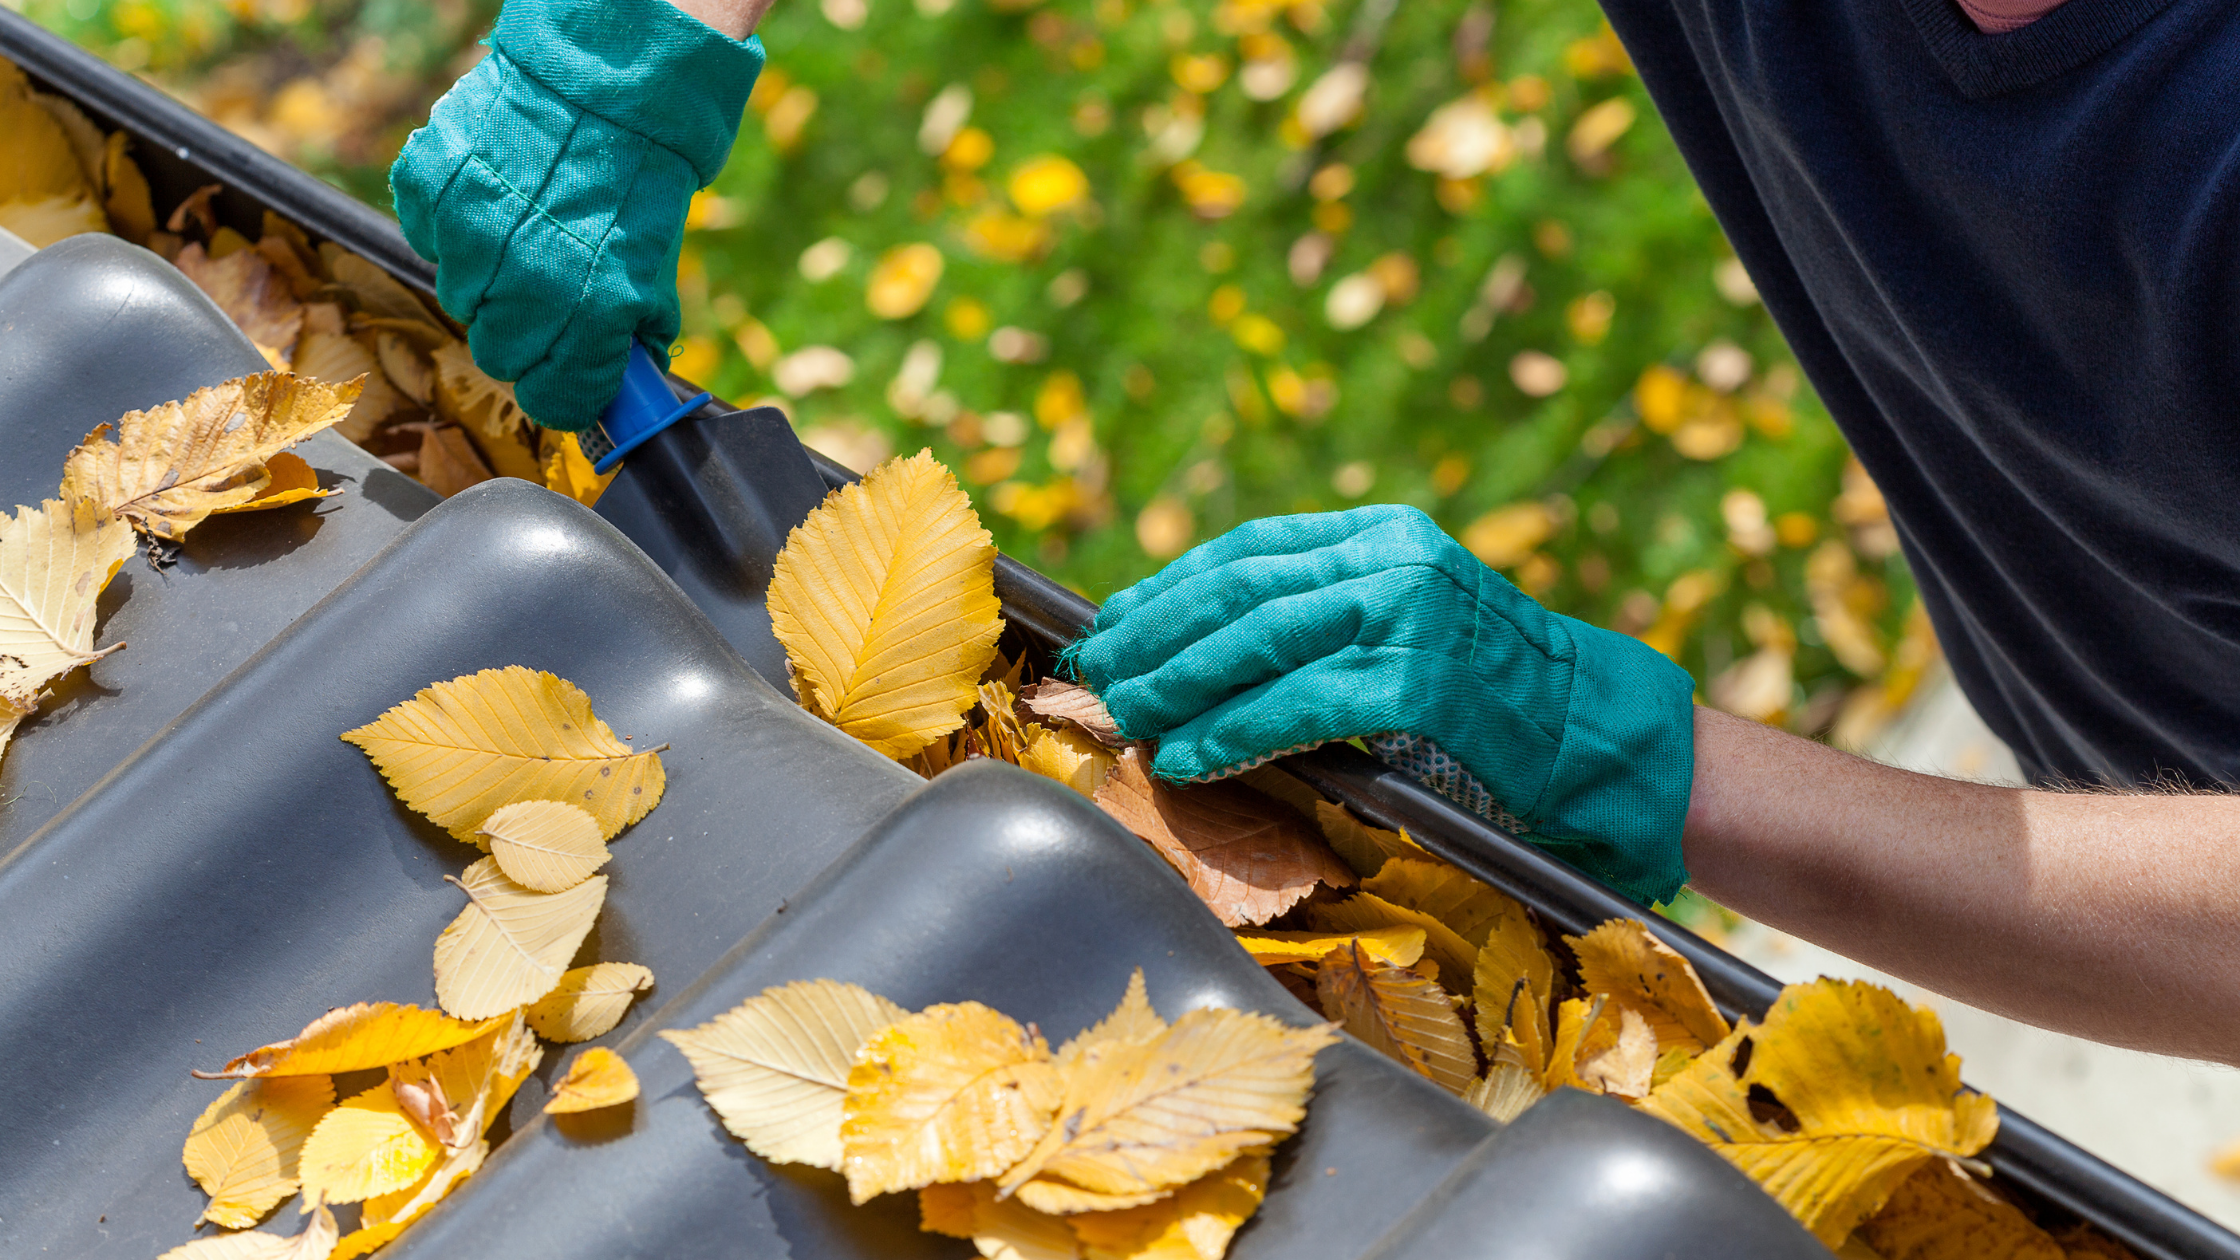 Gutter Cleaning Service Wake Forest Nc